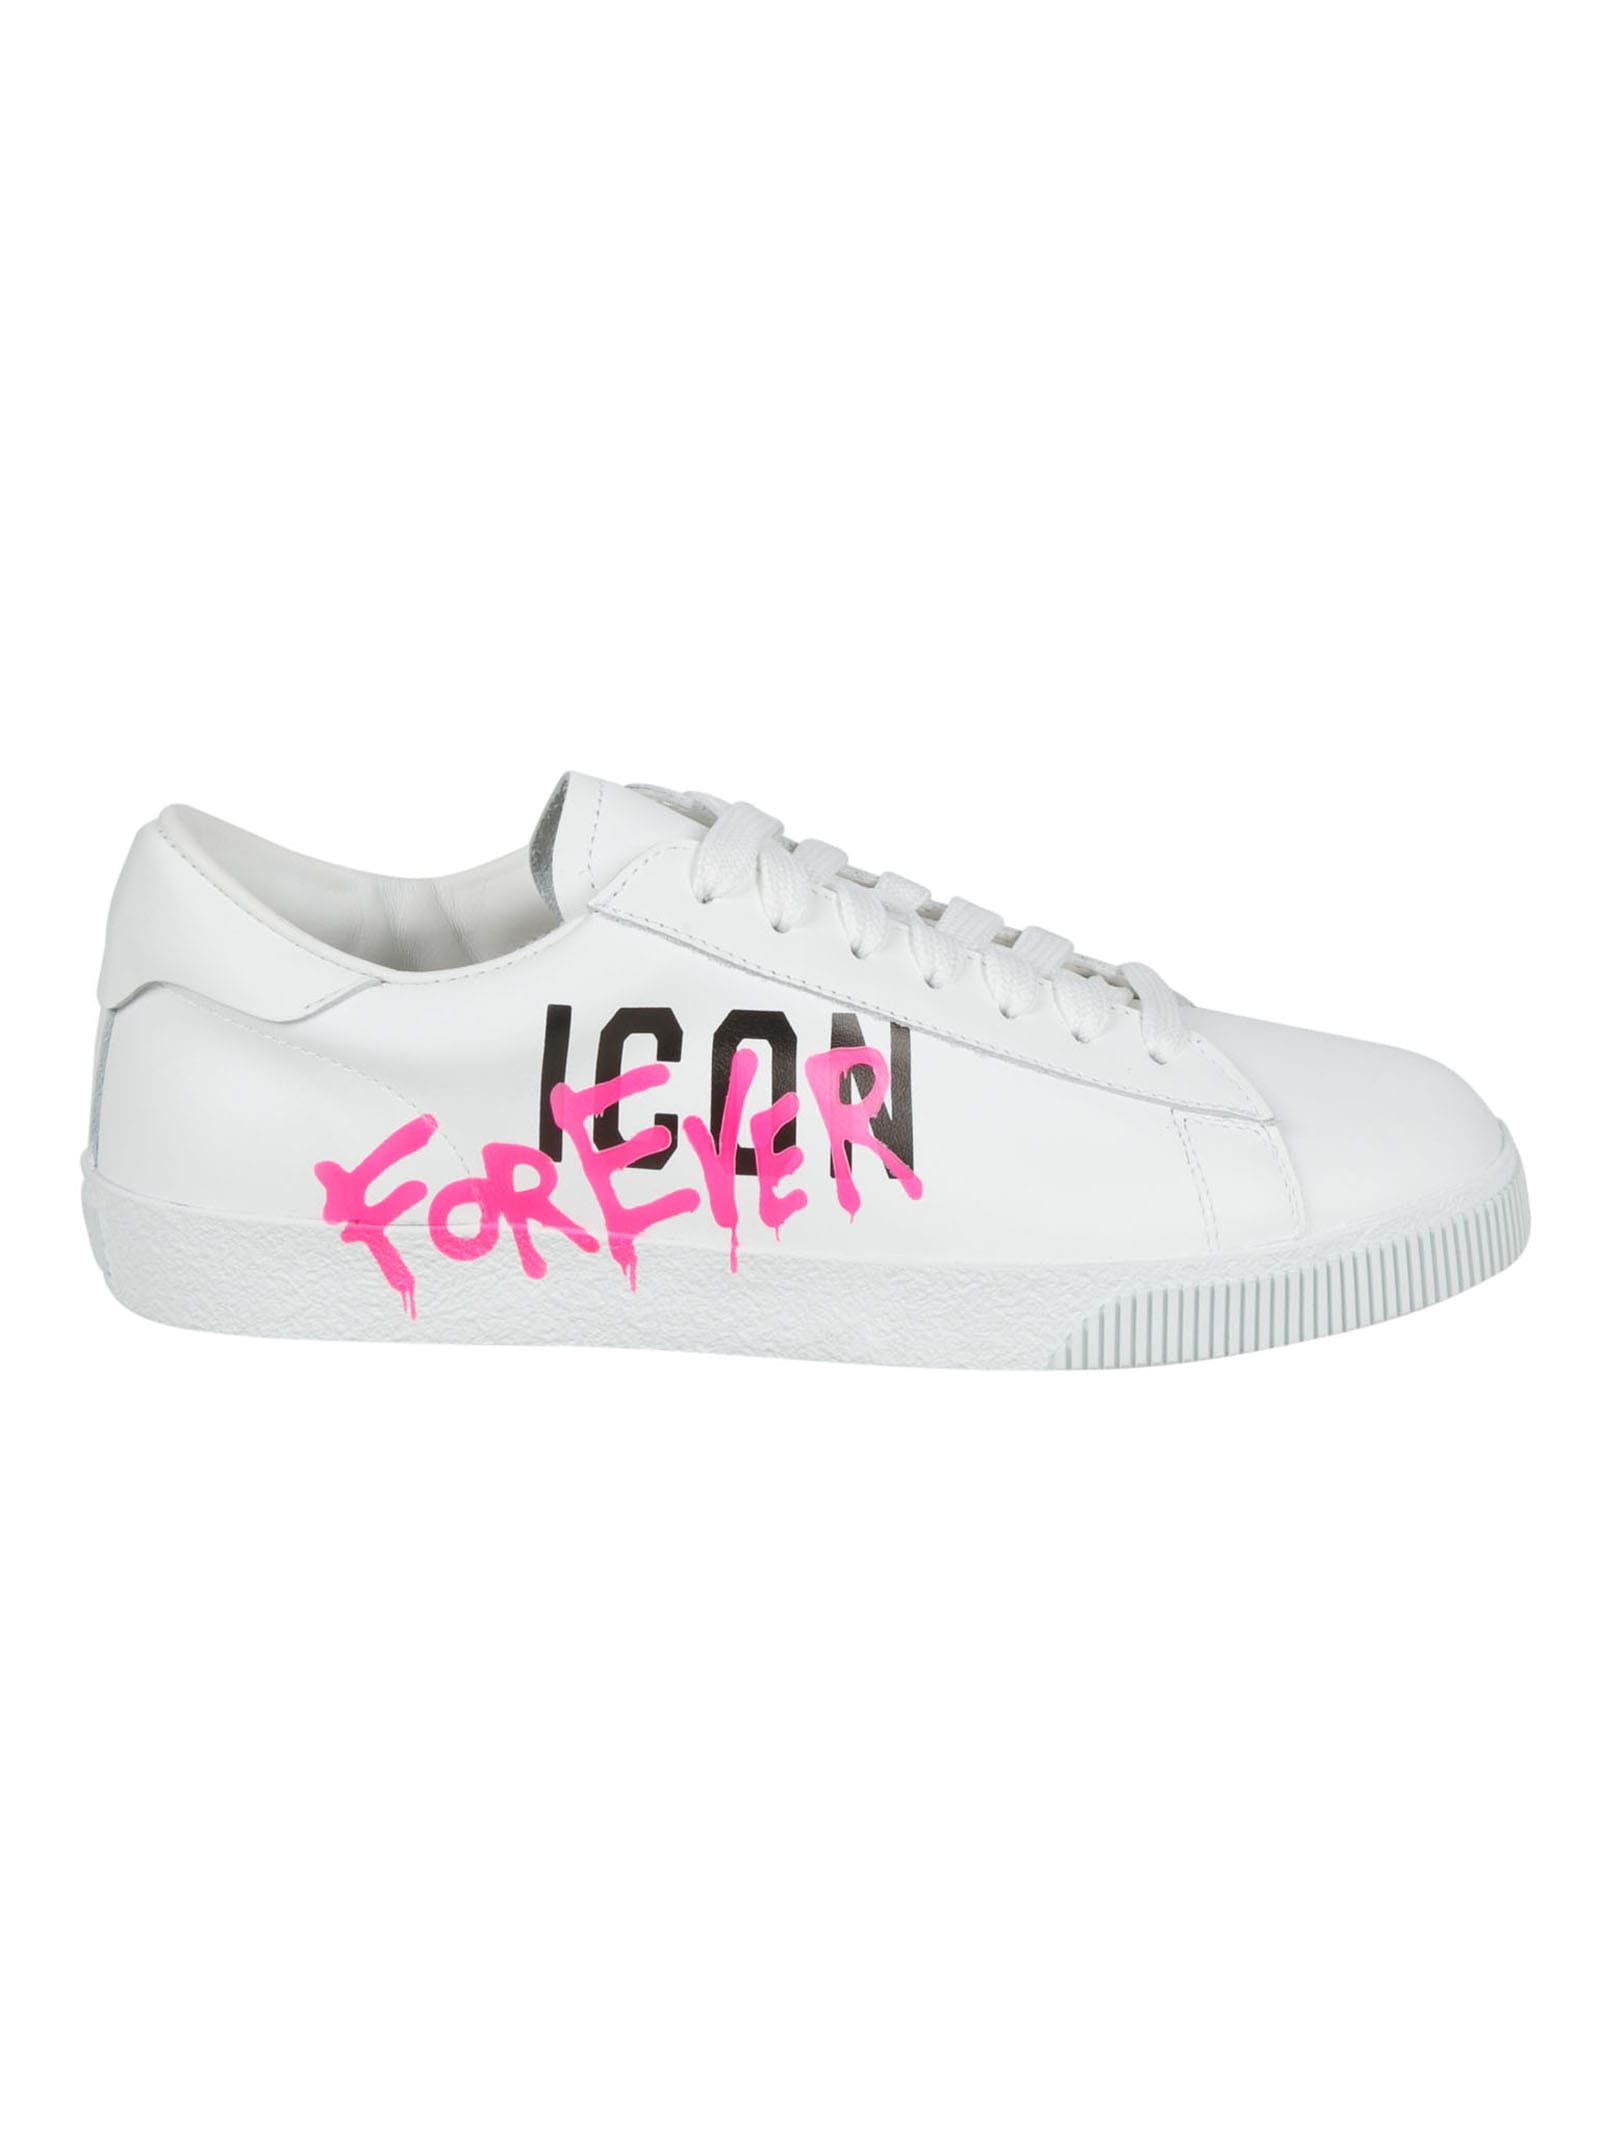 DSQUARED2 ICON FOREVER trainers